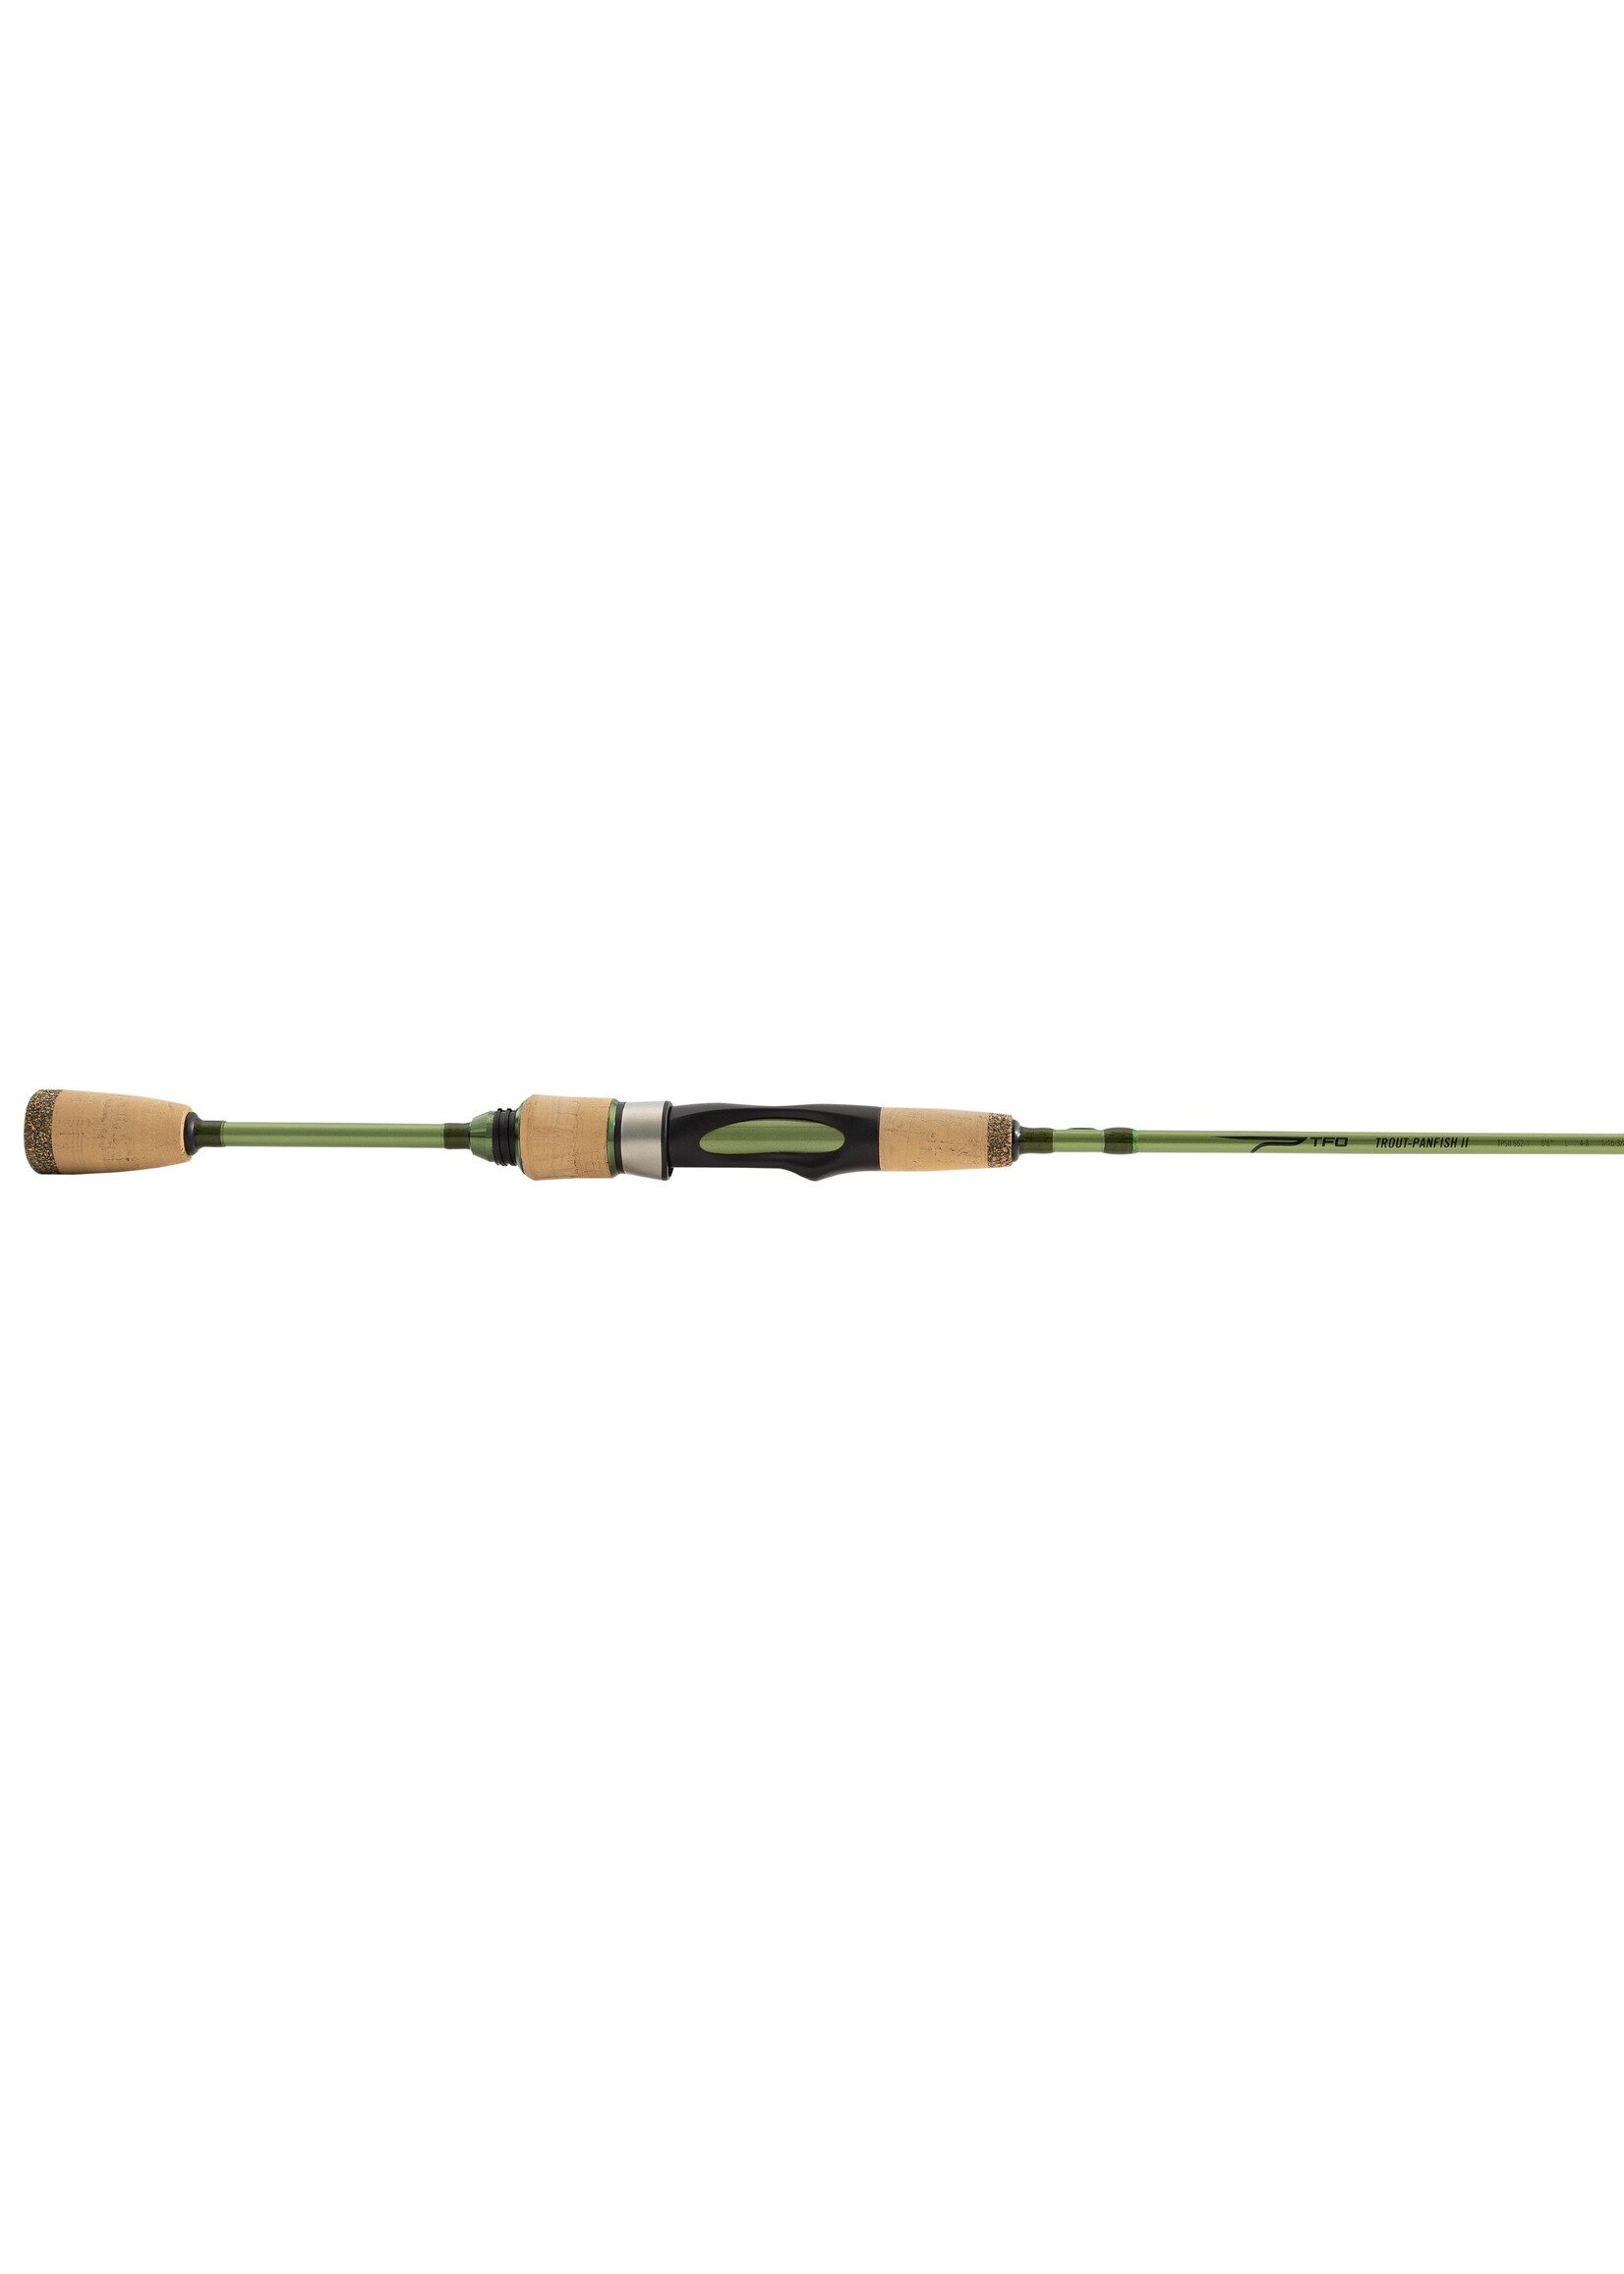 https://cdn.shoplightspeed.com/shops/626643/files/60465735/1652x2313x2/temple-fork-outfitters-tfo-trout-panfish-ii-spinni.jpg